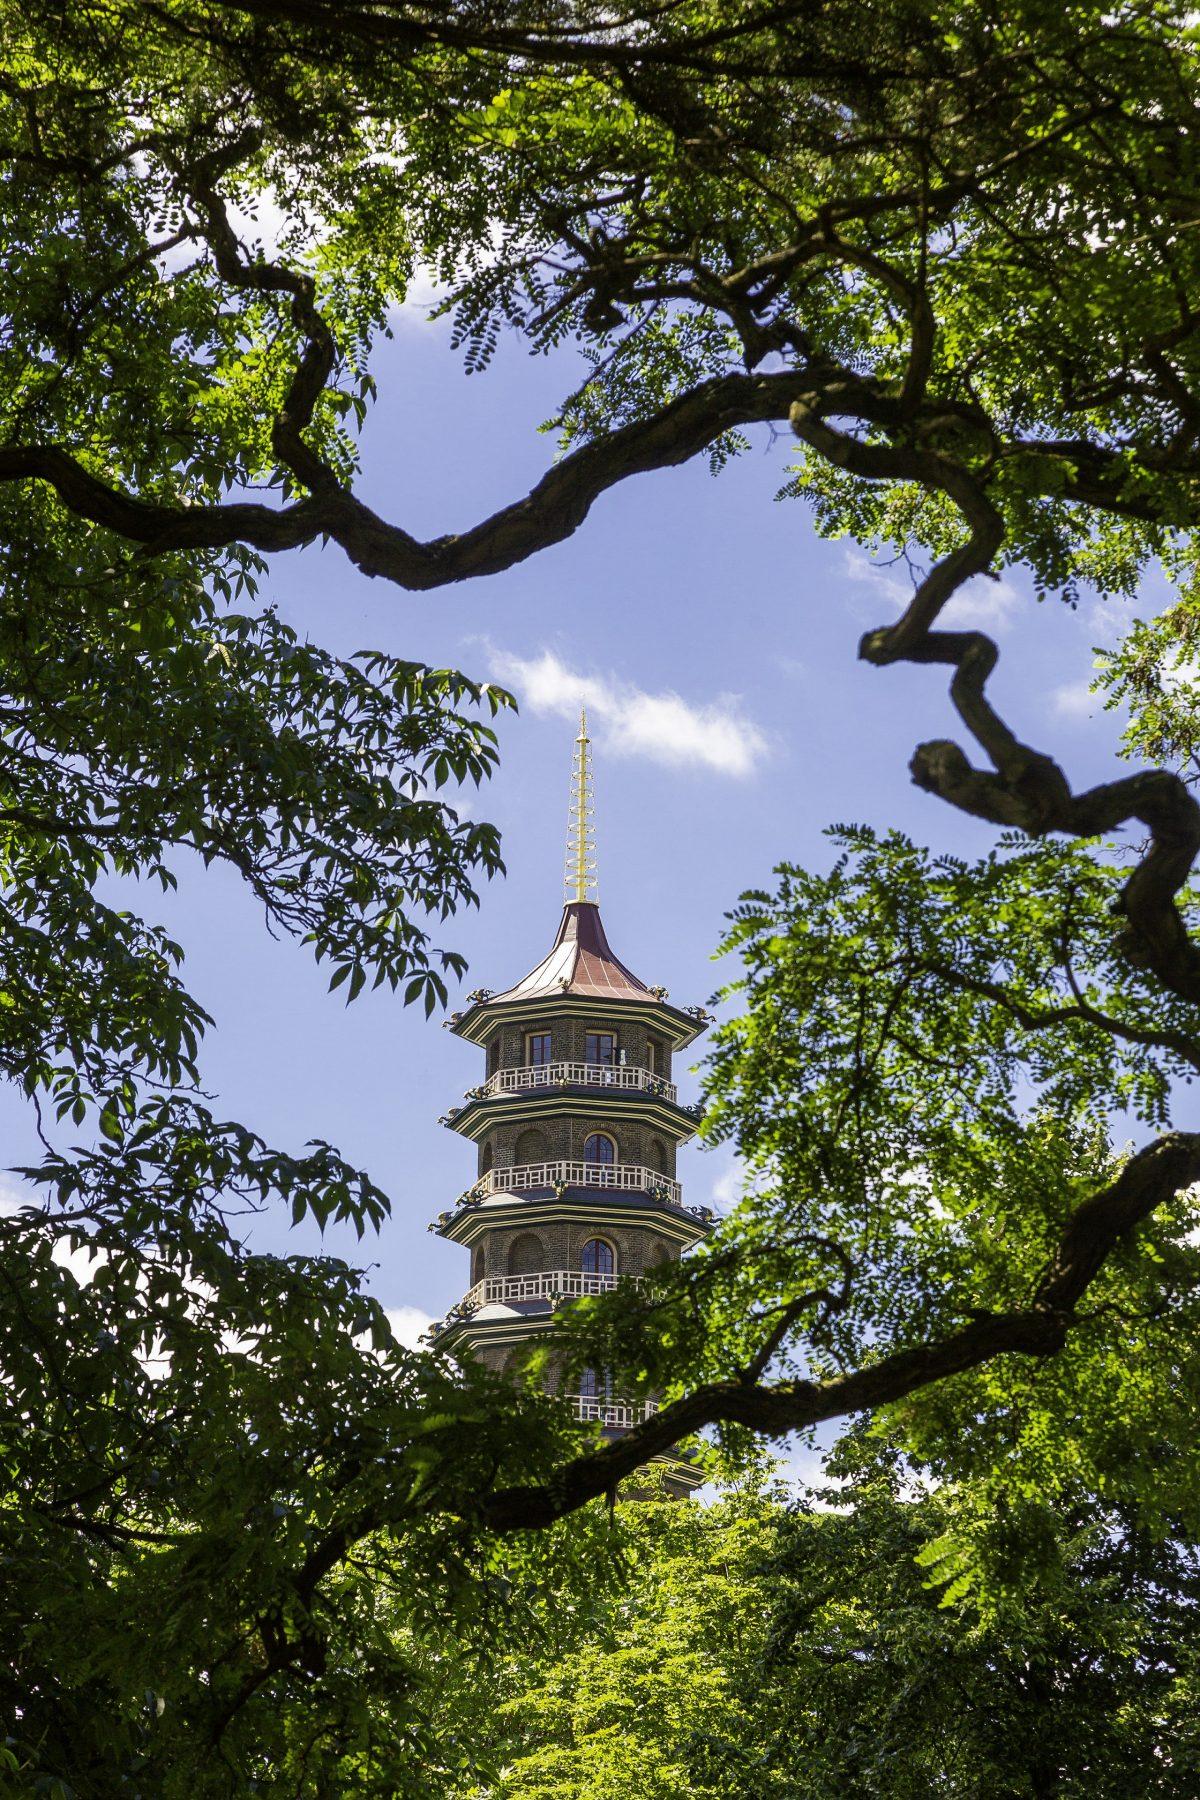 The peak of Sir William Chambers's newly restored Great Pagoda as seen between the trees at Kew Gardens. (Richard Lea-Hair/Historic Royal Palaces)